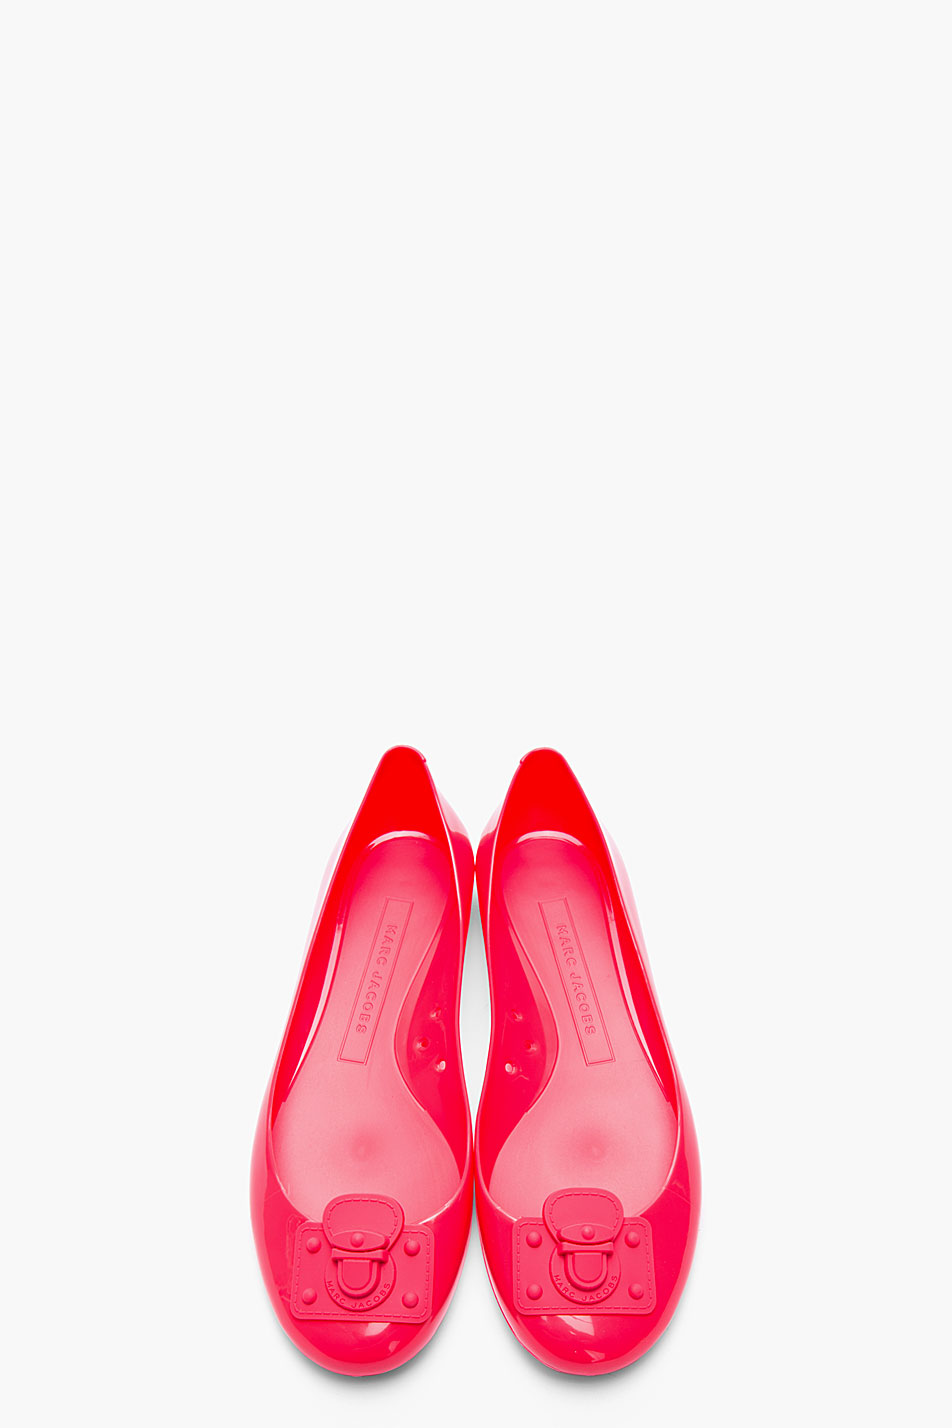 Brainy Mademoiselle: Jelly Shoes